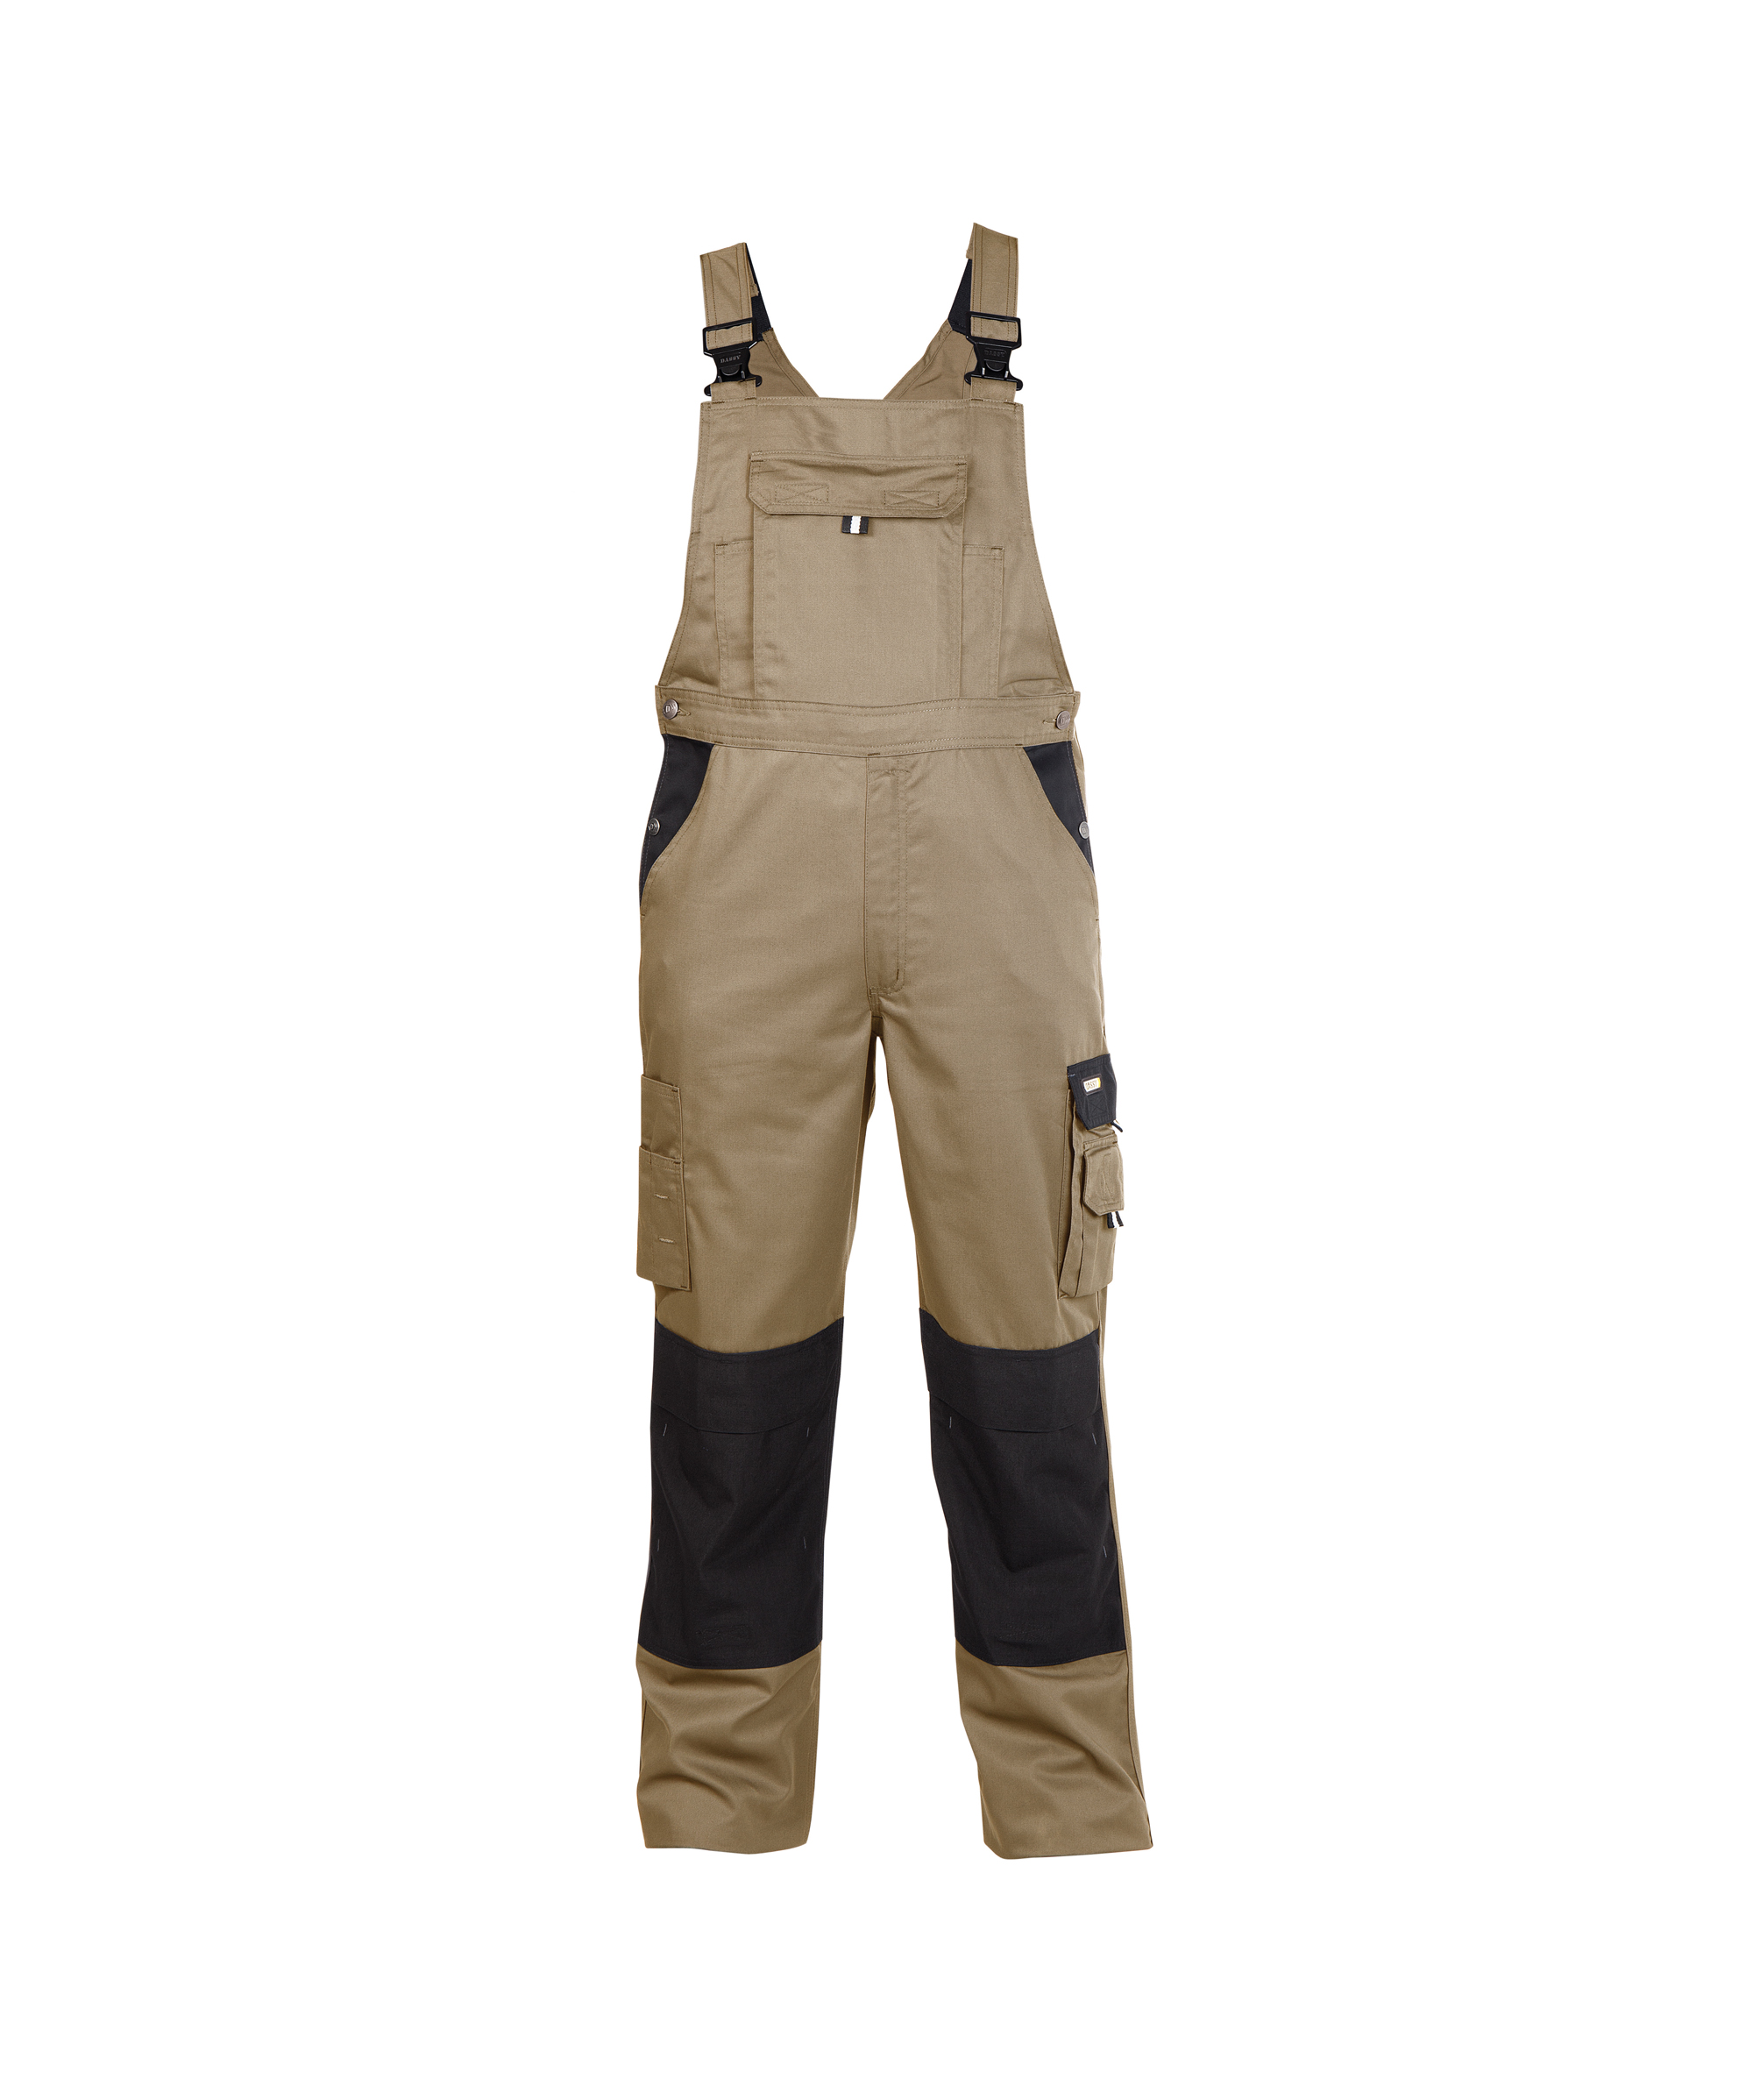 versailles_two-tone-brace-overall-with-knee-pockets_beige-black_front.jpg